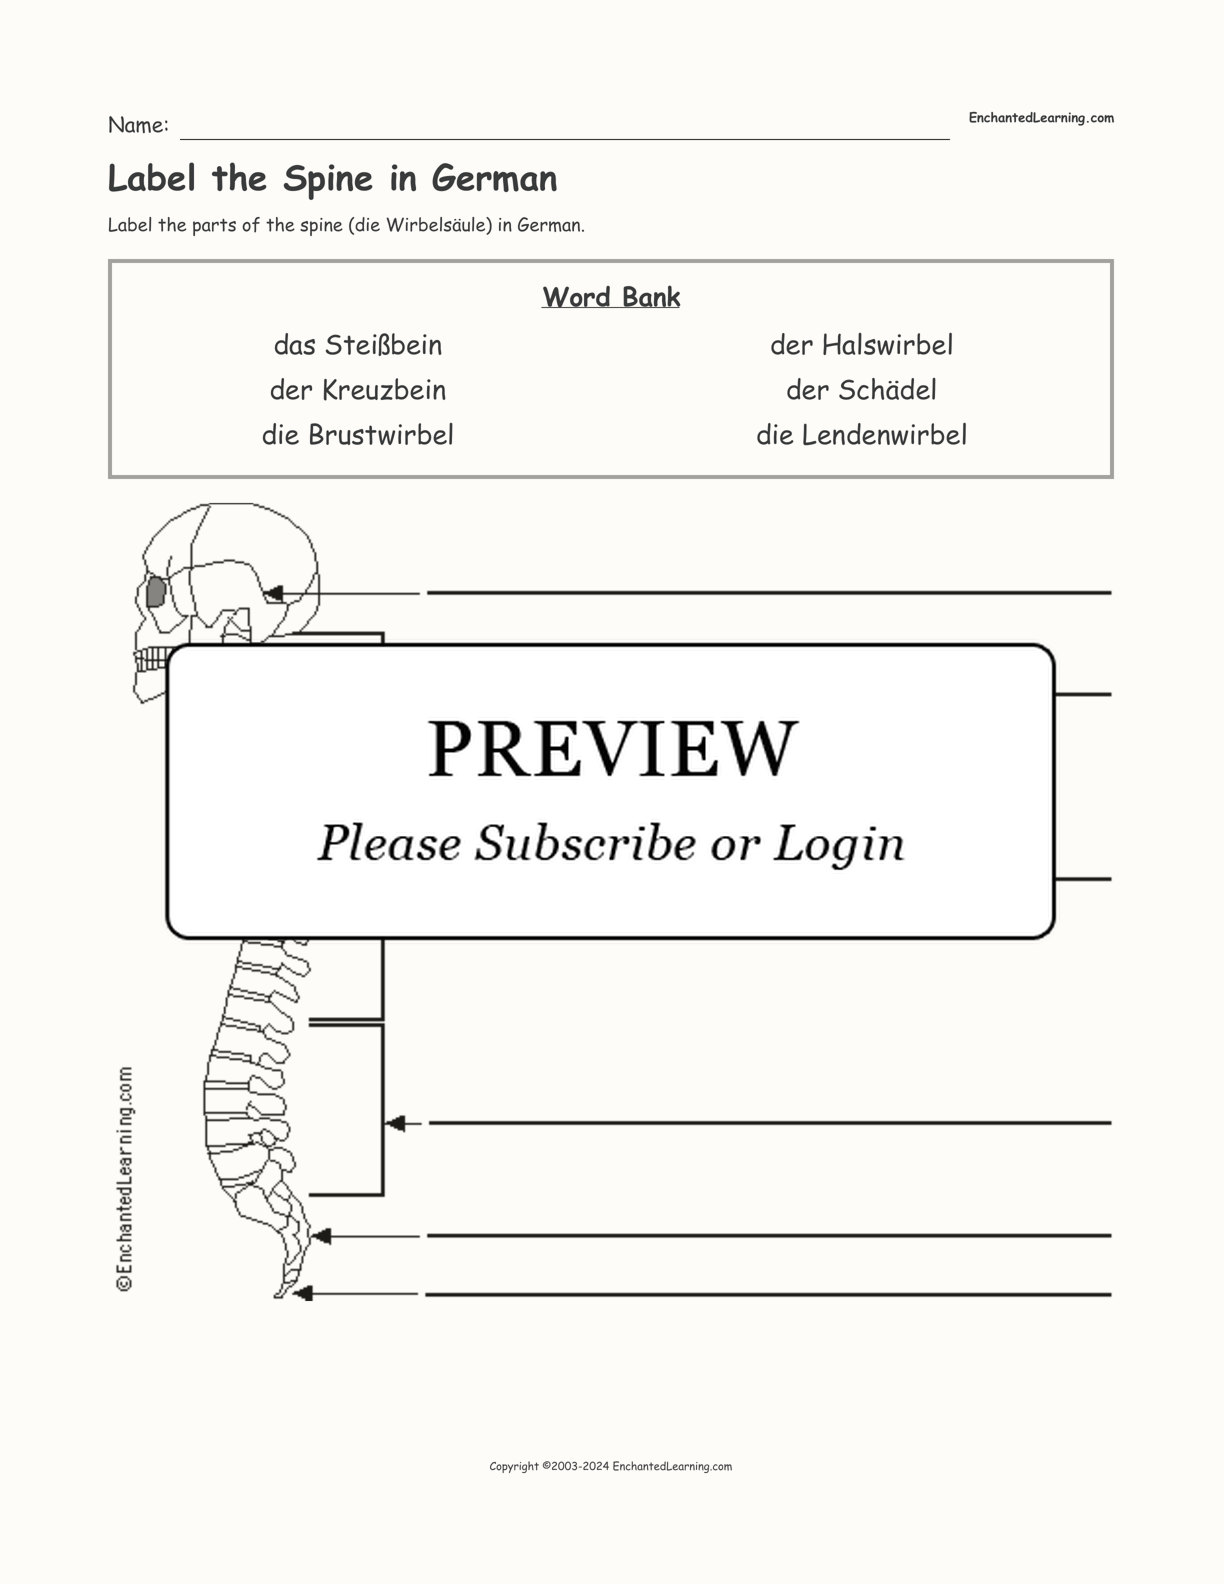 Label the Spine in German interactive worksheet page 1